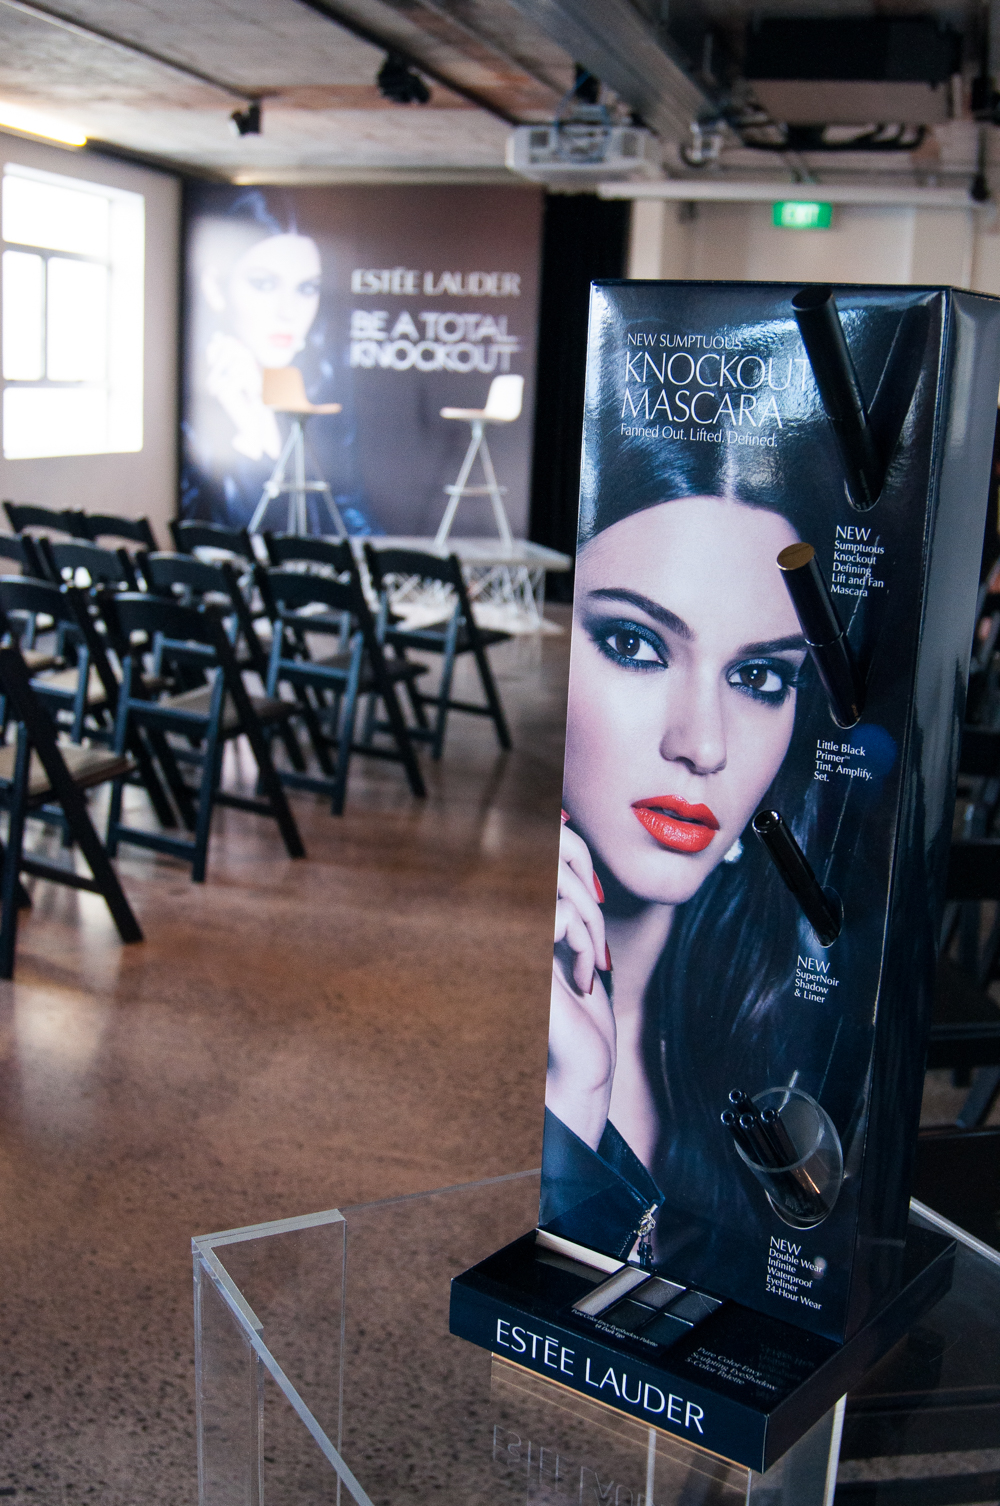 Our event with Estée Lauder makeup artist Victor Henao was held at Auckland's Spark Lab, within the Seafarers Building.